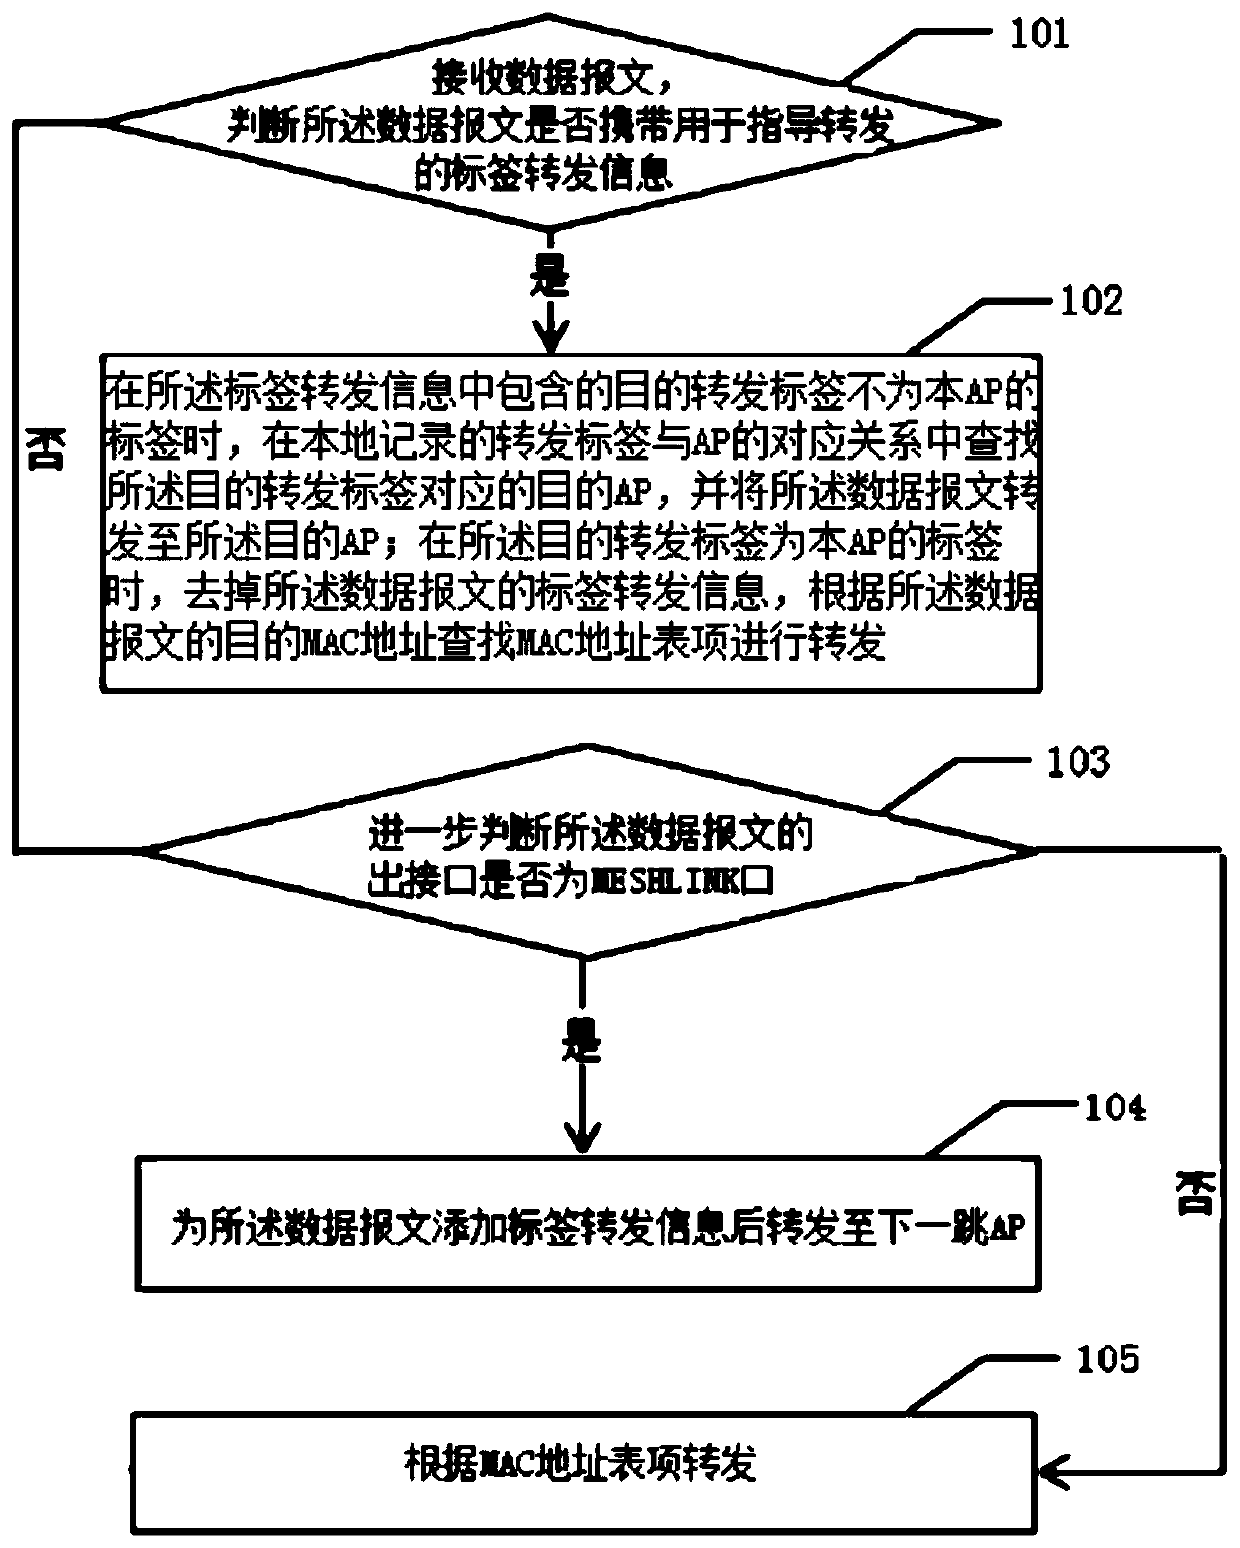 A message forwarding method and device